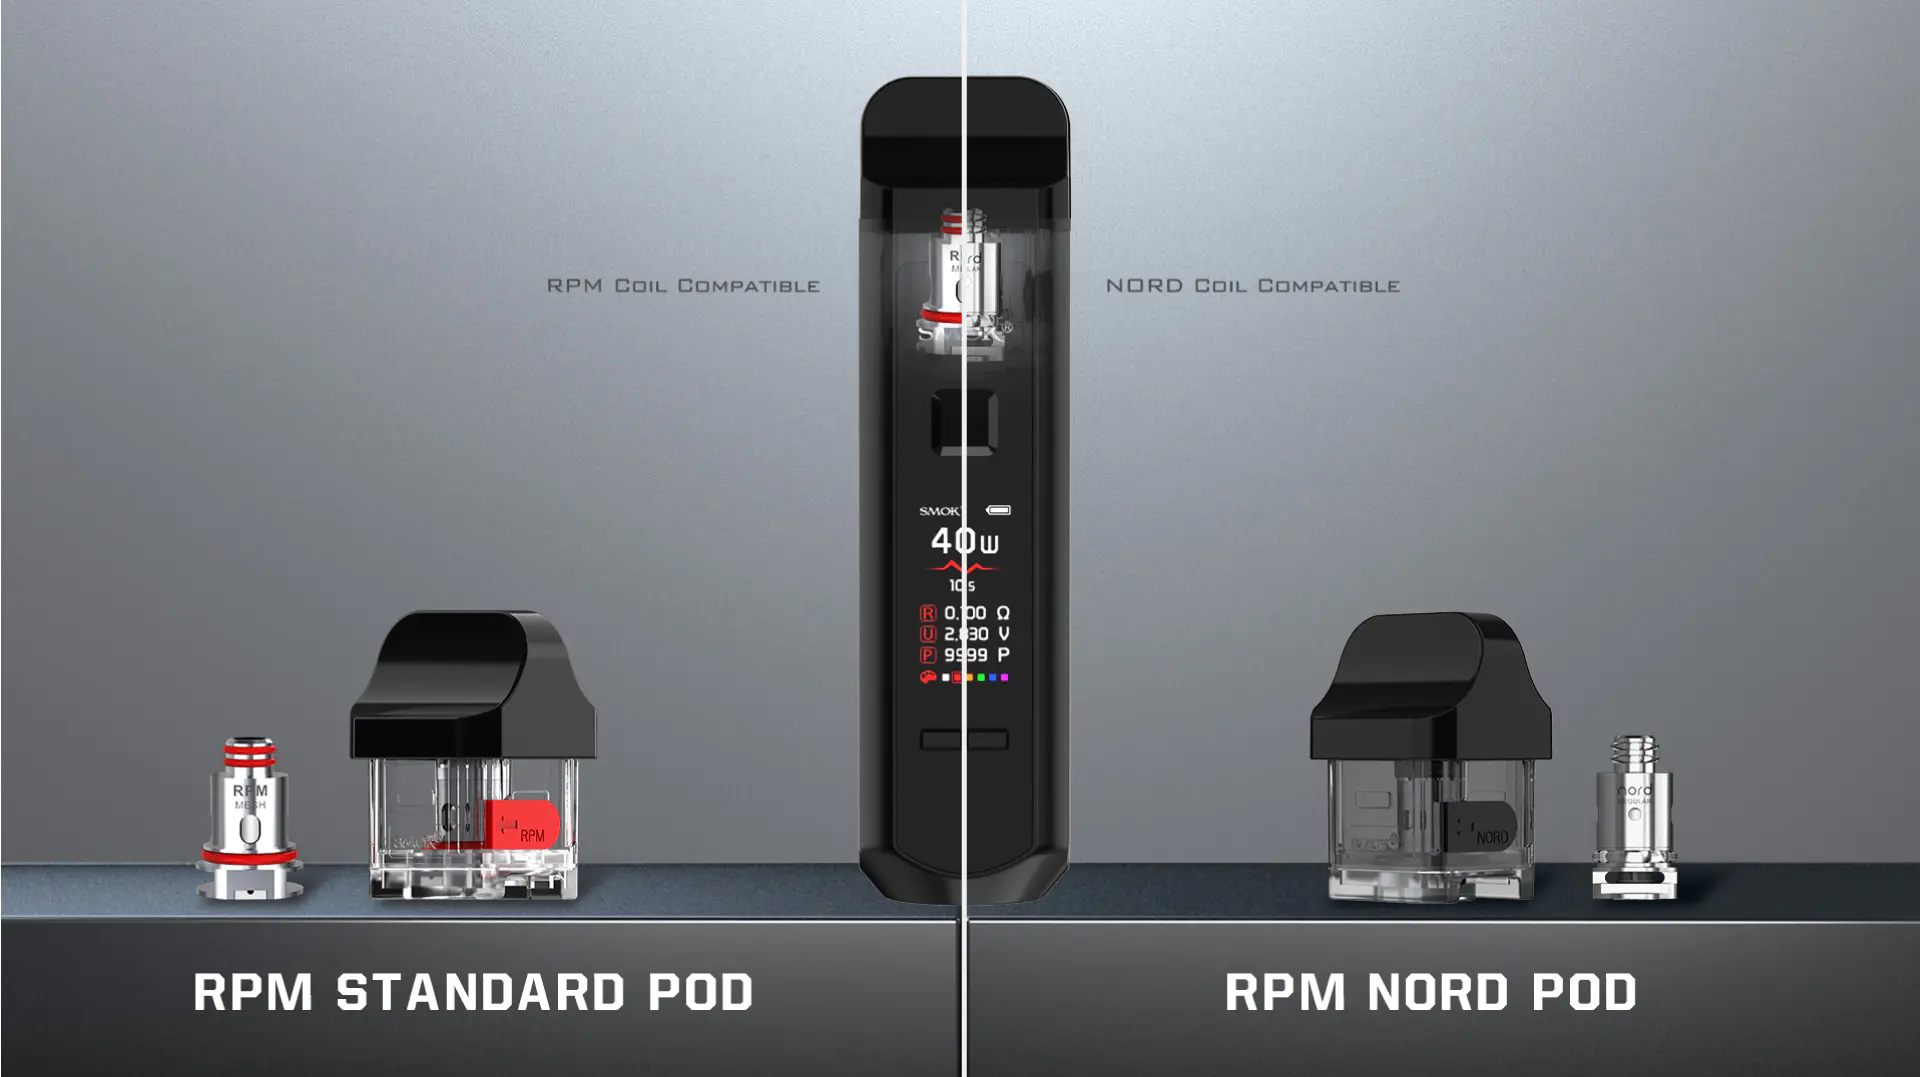 SMOK RPM40 is Nord Coil Compatible